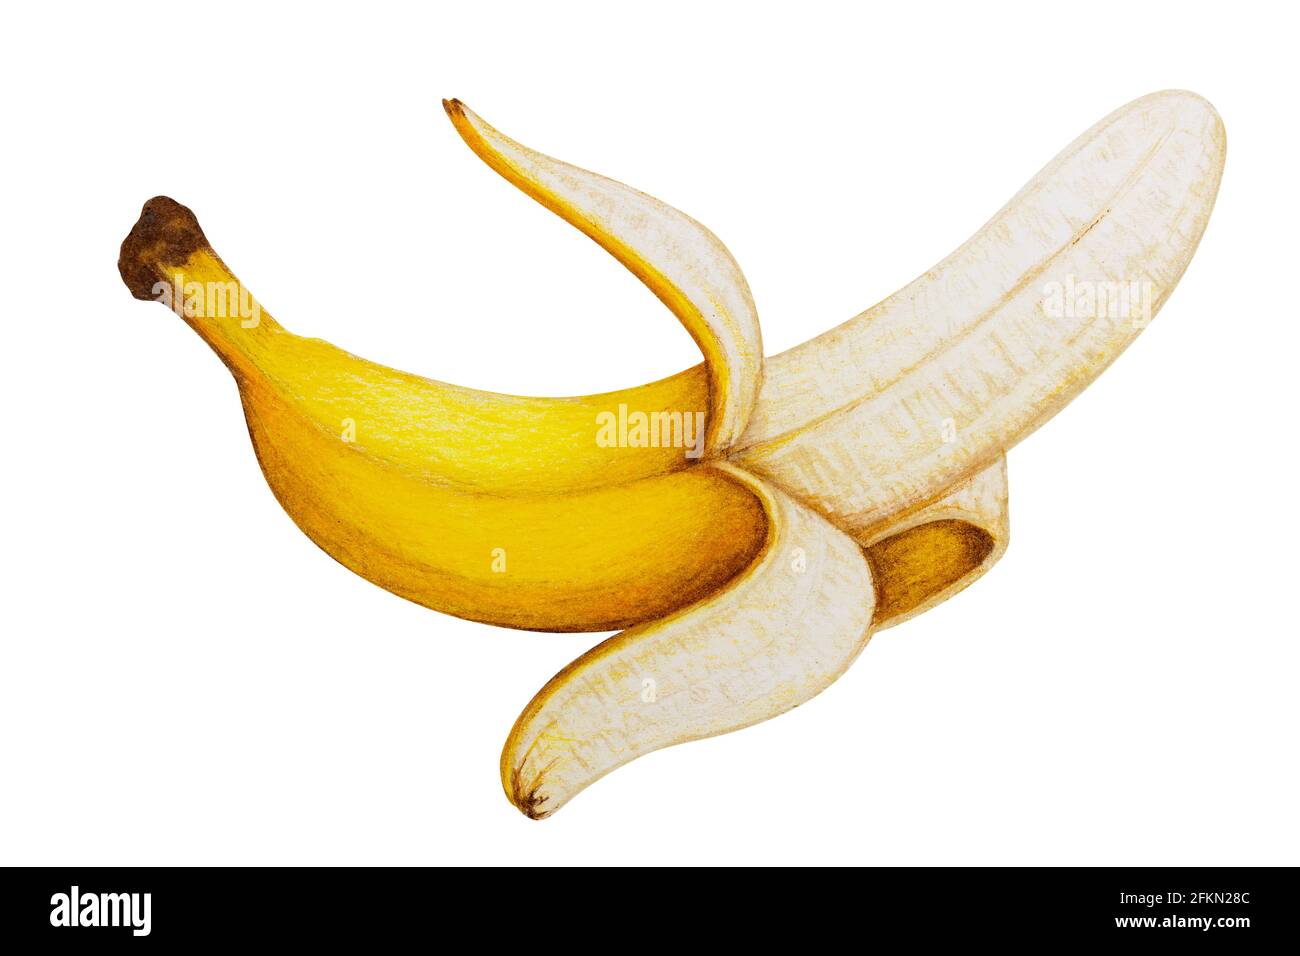 How to Draw a Banana - Two Realistic Banana Drawing Tutorials To Try